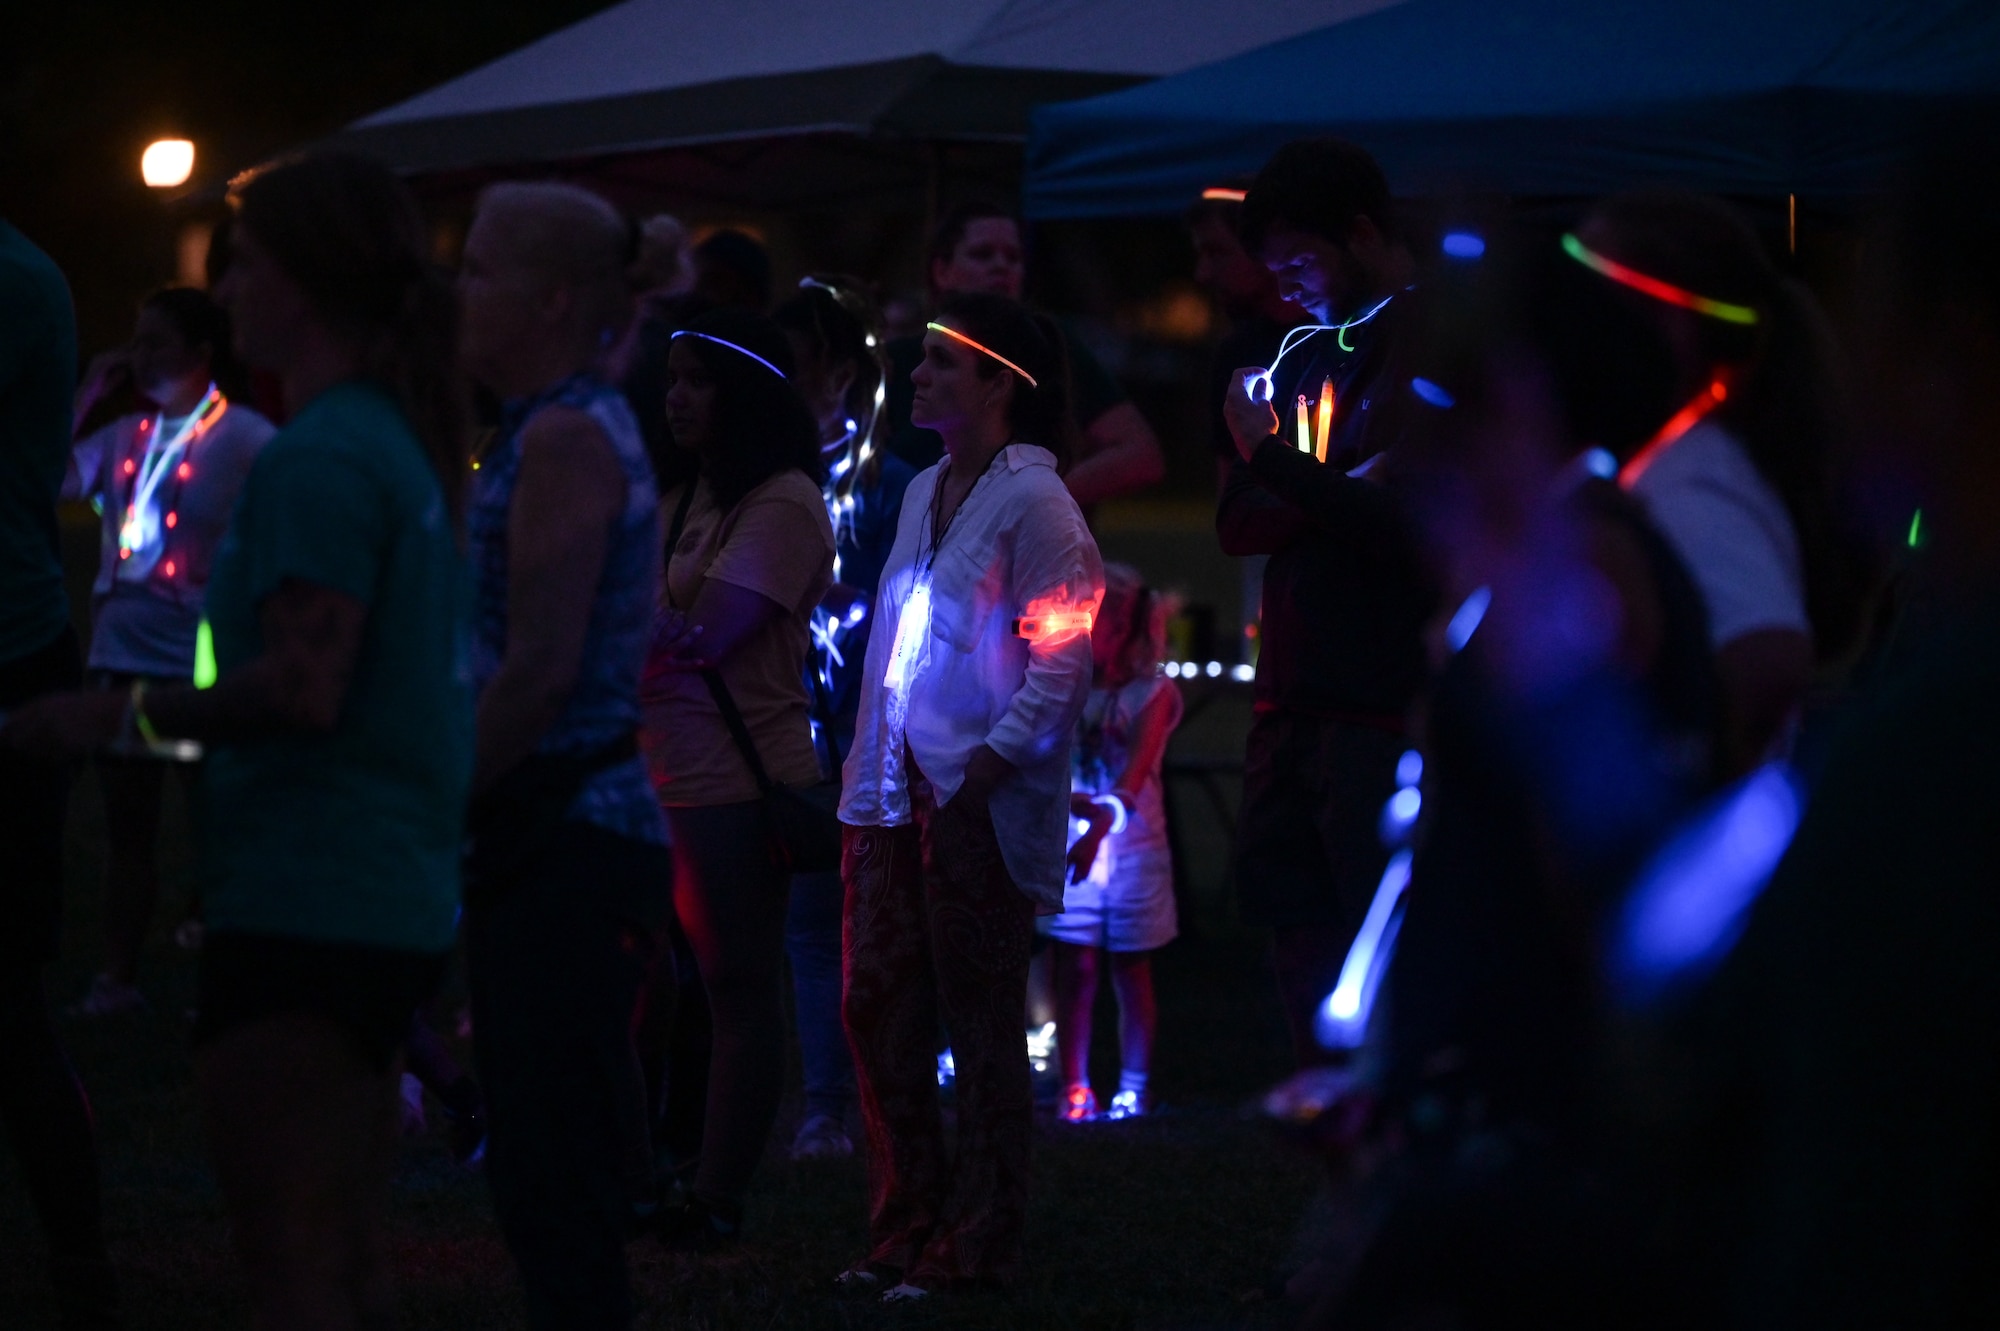 Participants listen to a Sexual Assault Awareness Prevention Month proclamation during a SAAPM glow run at the Missing Man Trail on Joint Base Pearl Harbor-Hickam, Hawaii, Mar. 31, 2023. April is designated as SAAPM, and this year the Department of Defense’s theme is “Step Forward”, encouraging individuals to use their personal strength to advance positive change in preventing sexual violence. (U.S. Air Force photo by Staff Sgt. Alan Ricker)